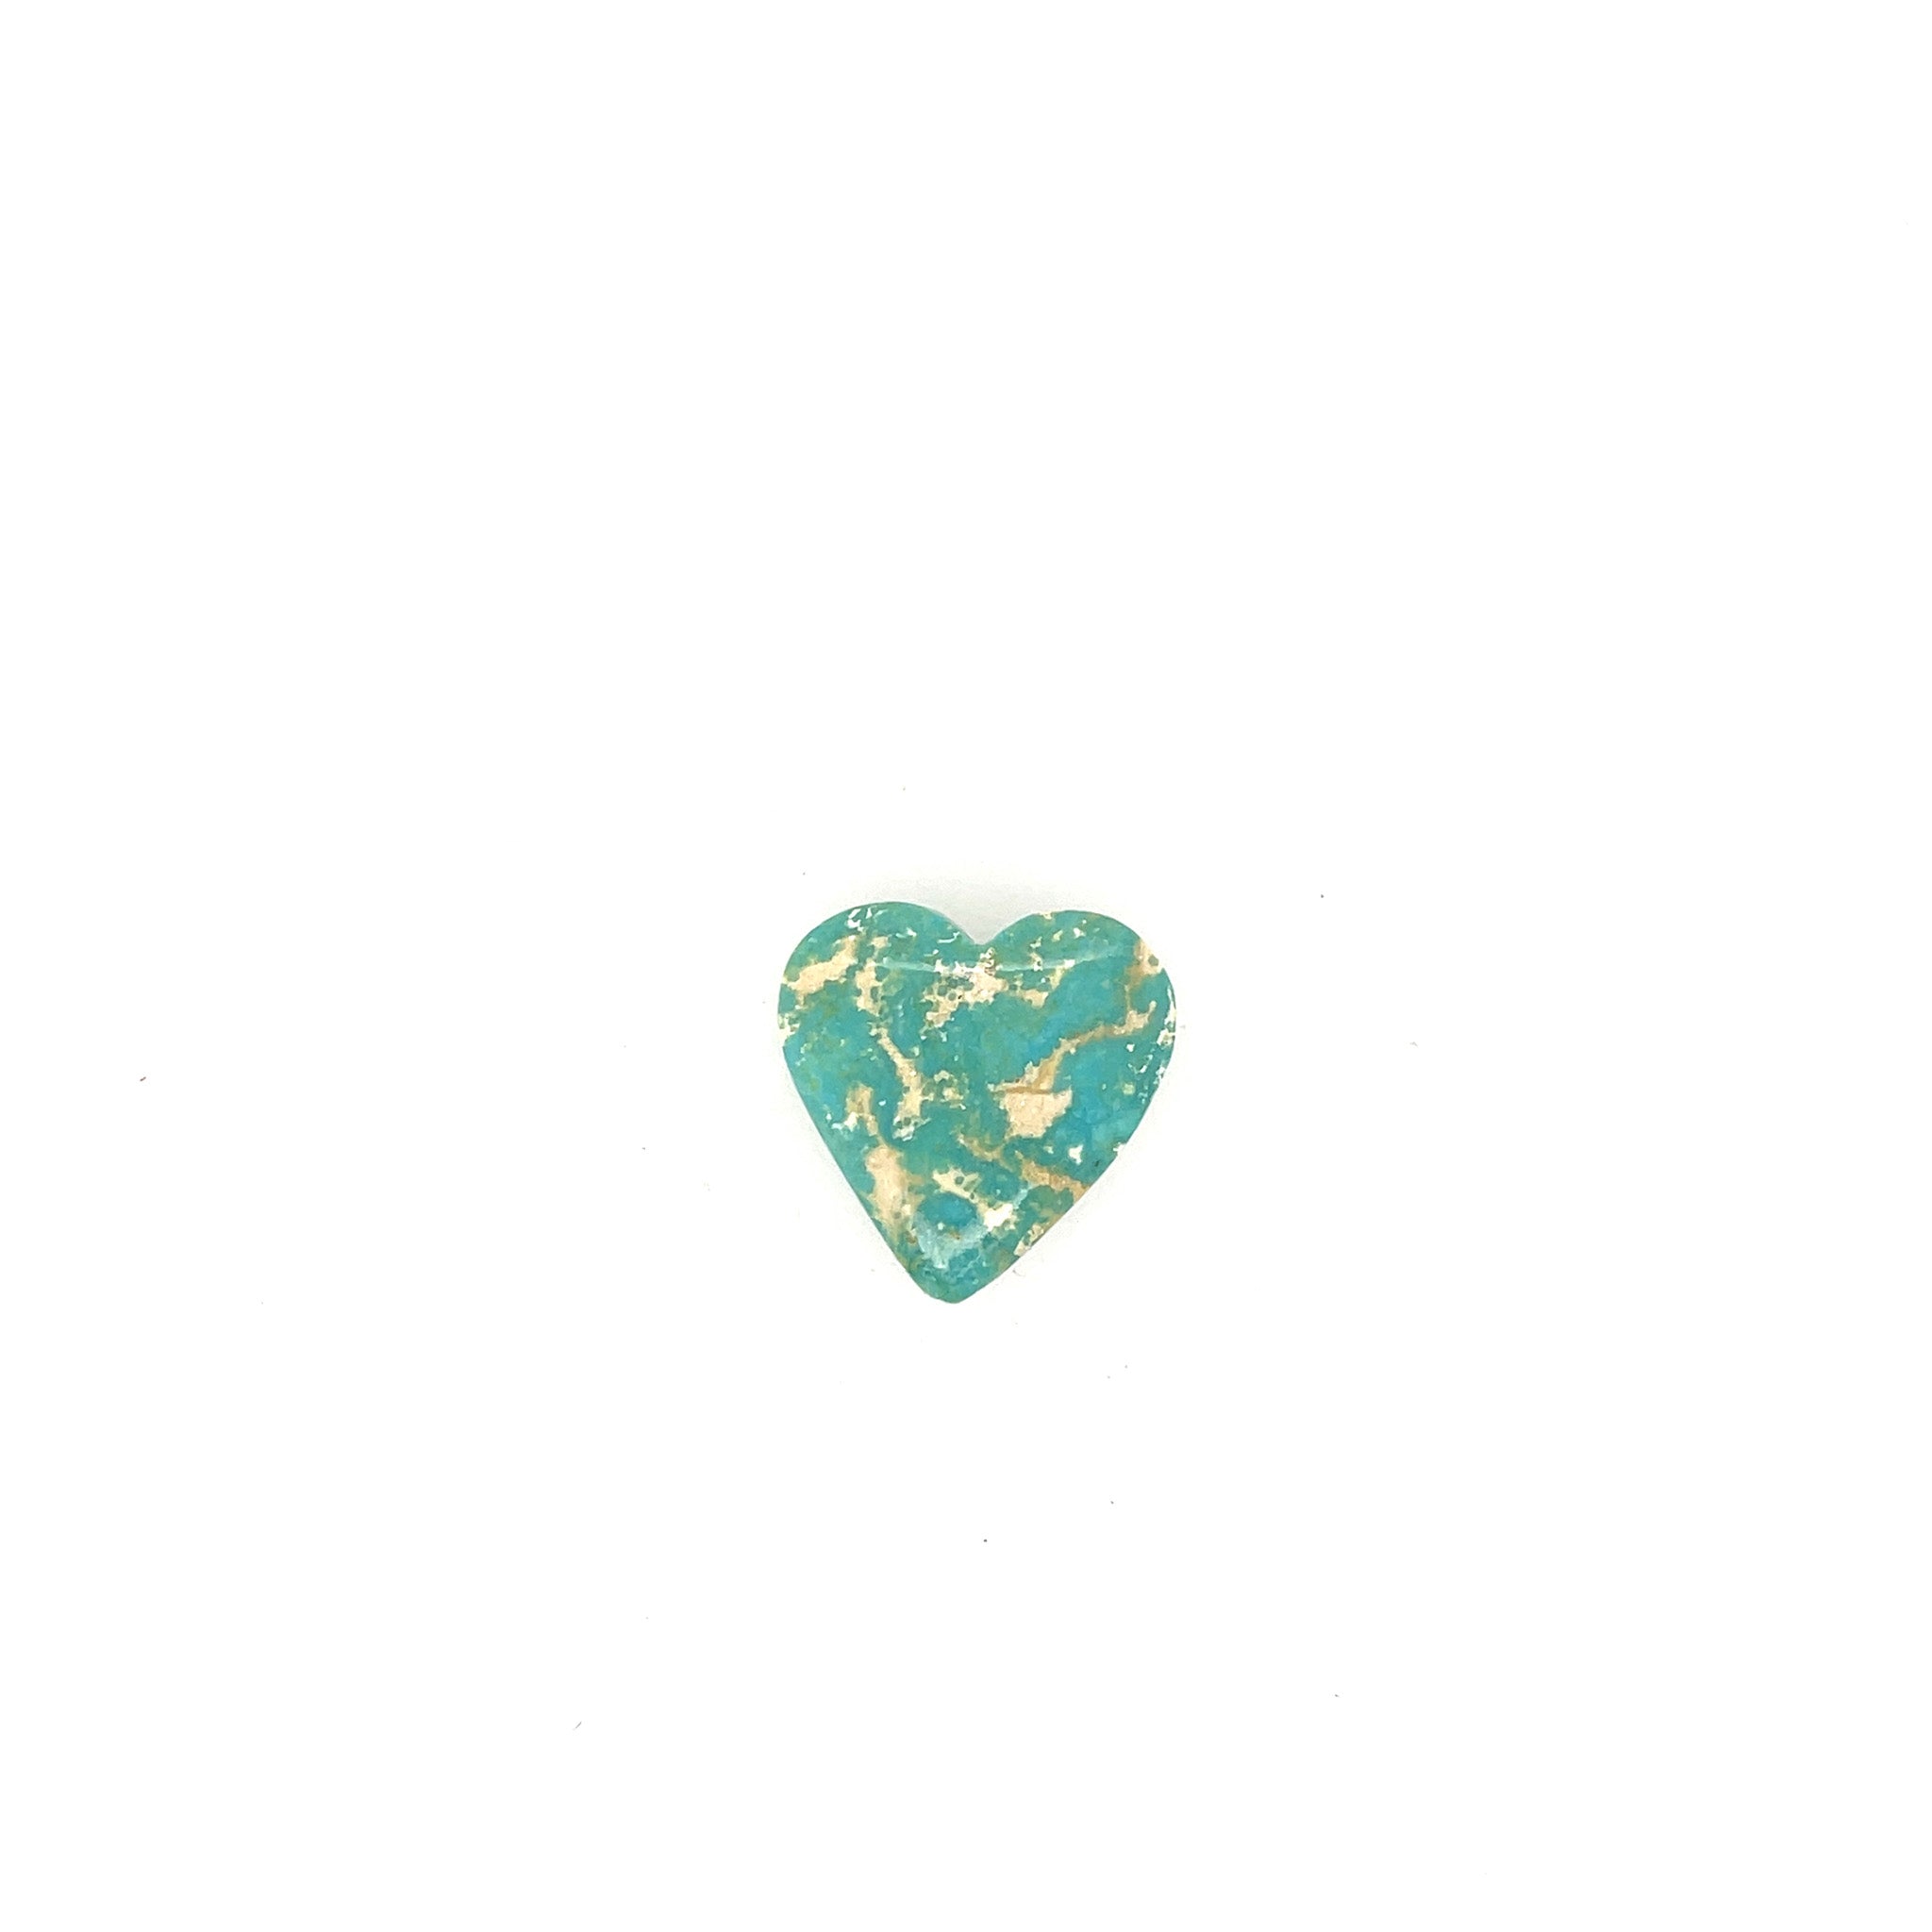 Turquoise Heart Cabs